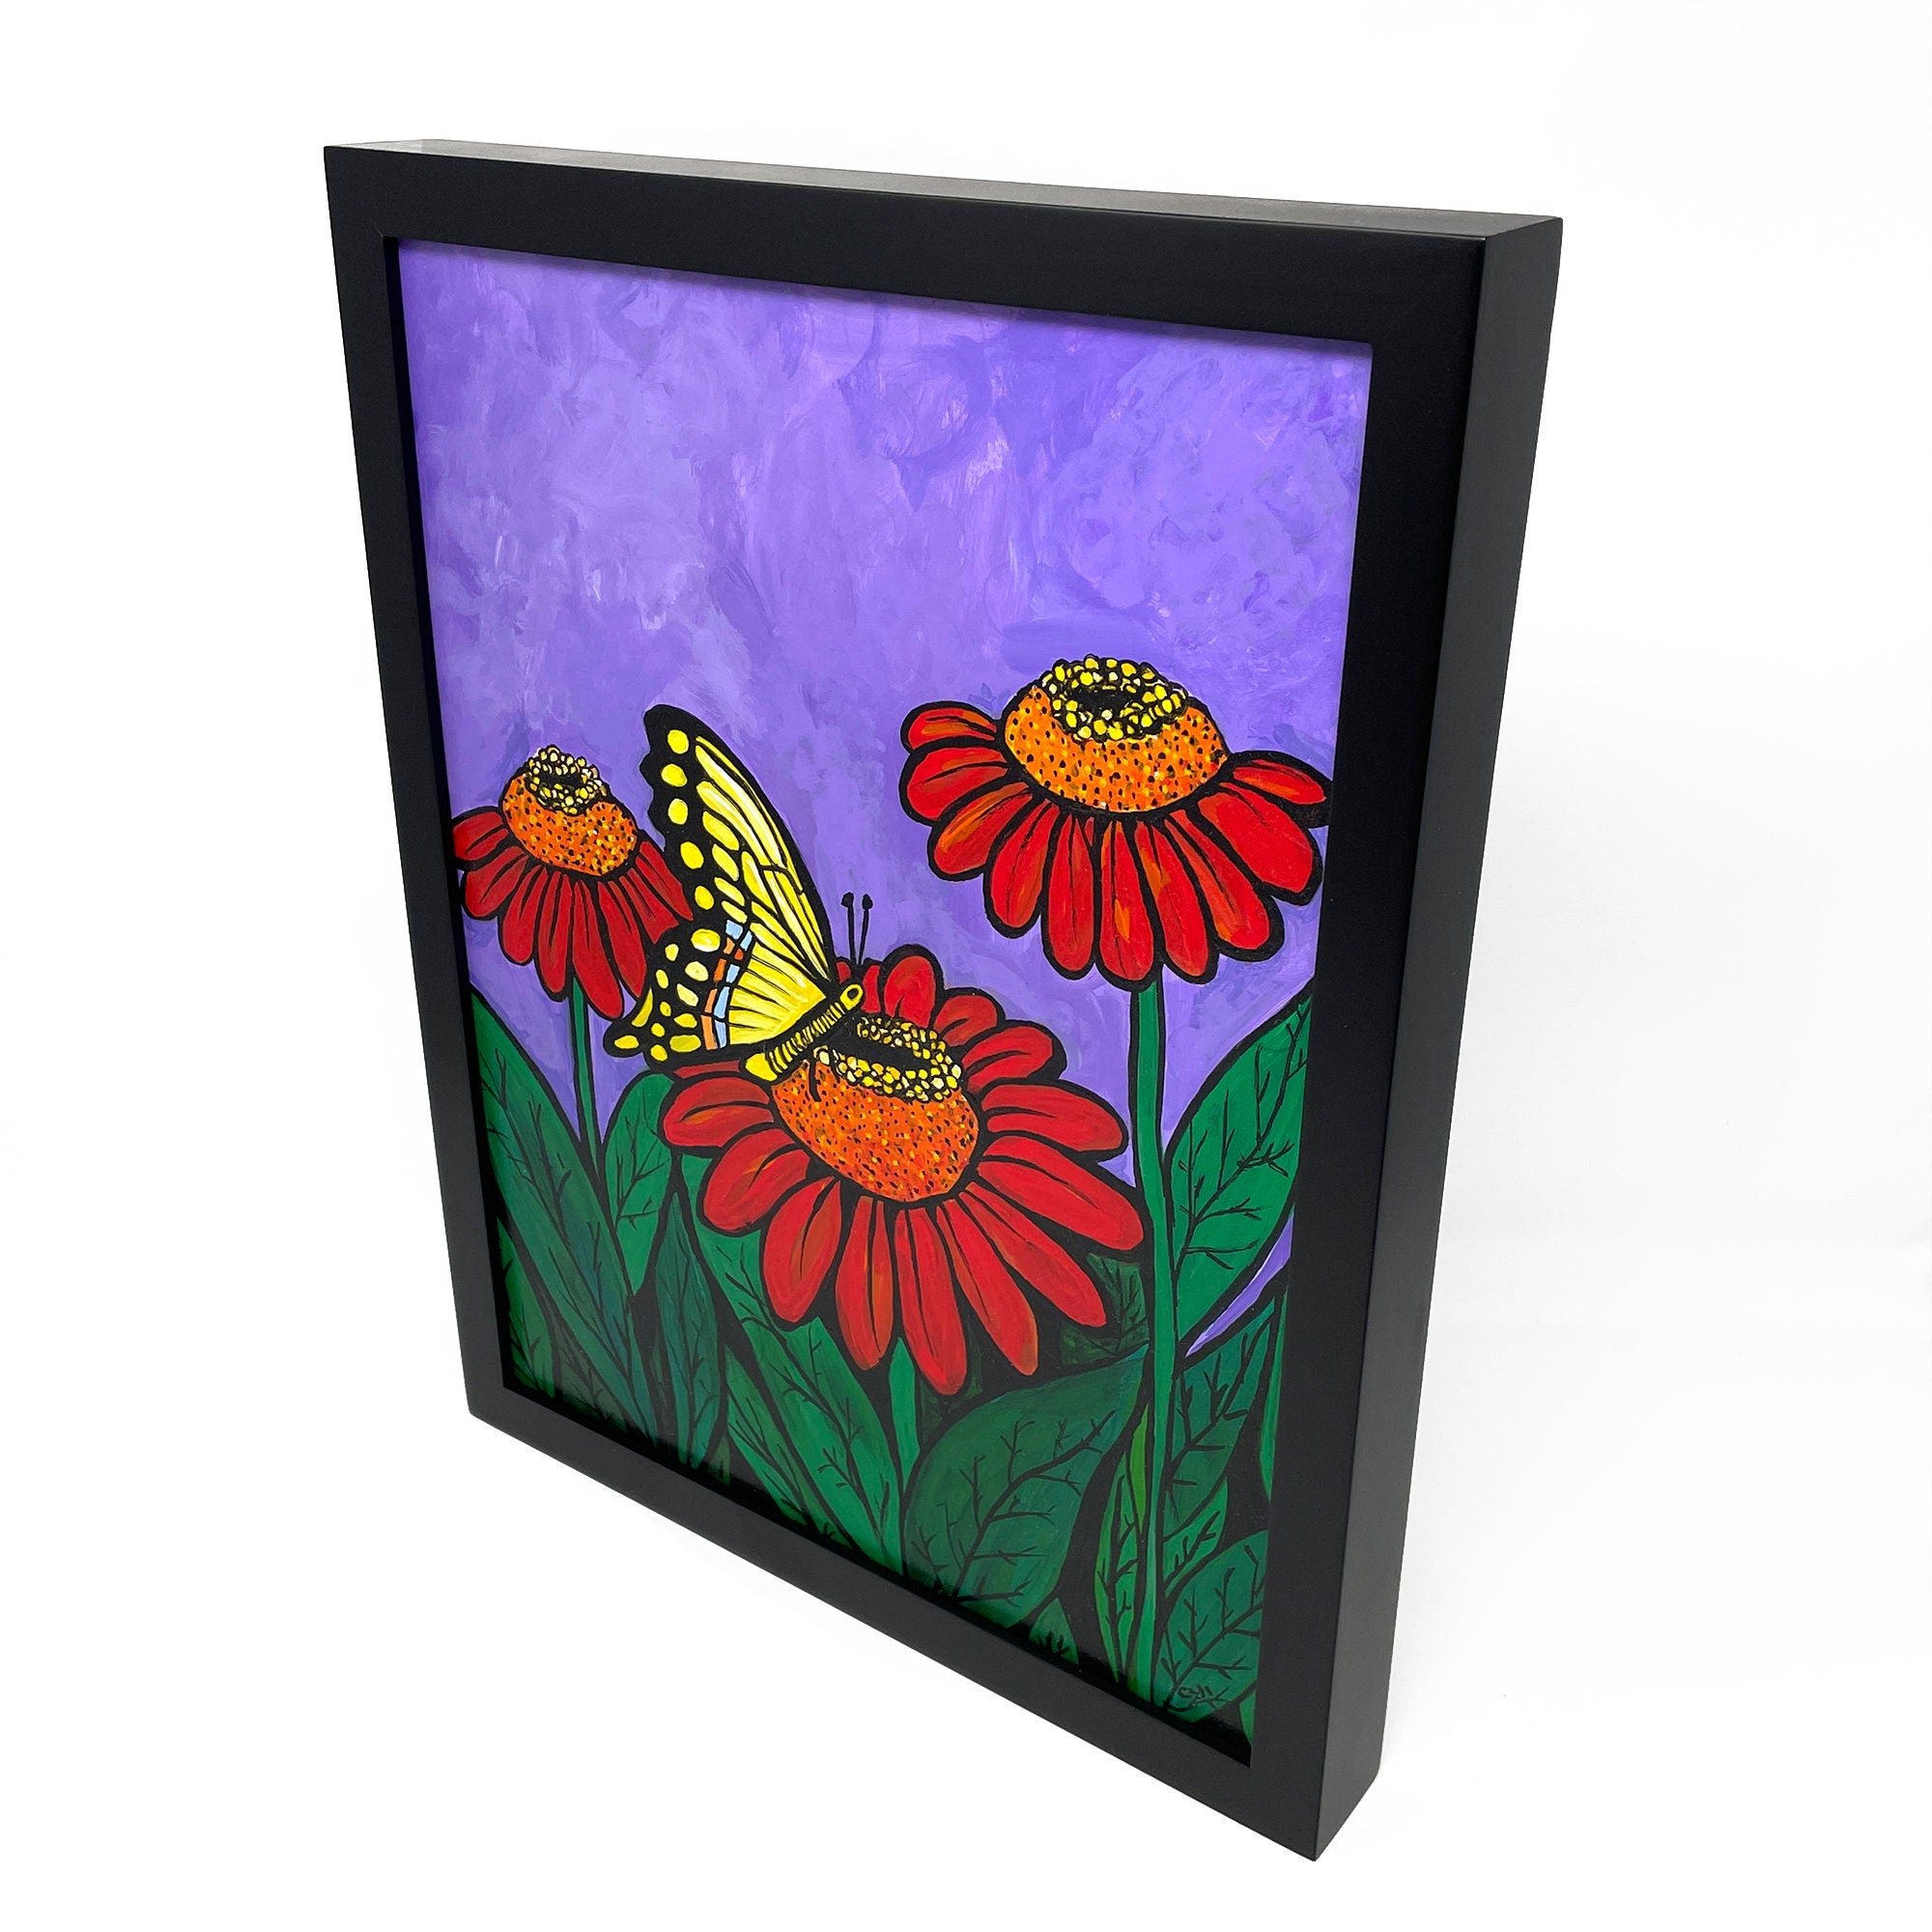 Original Swallowtail Painting - Colorful Swallowtail Butterfly with Zinnia Flowers - Framed Acrylic Painting - Pollinator Art - 11x14